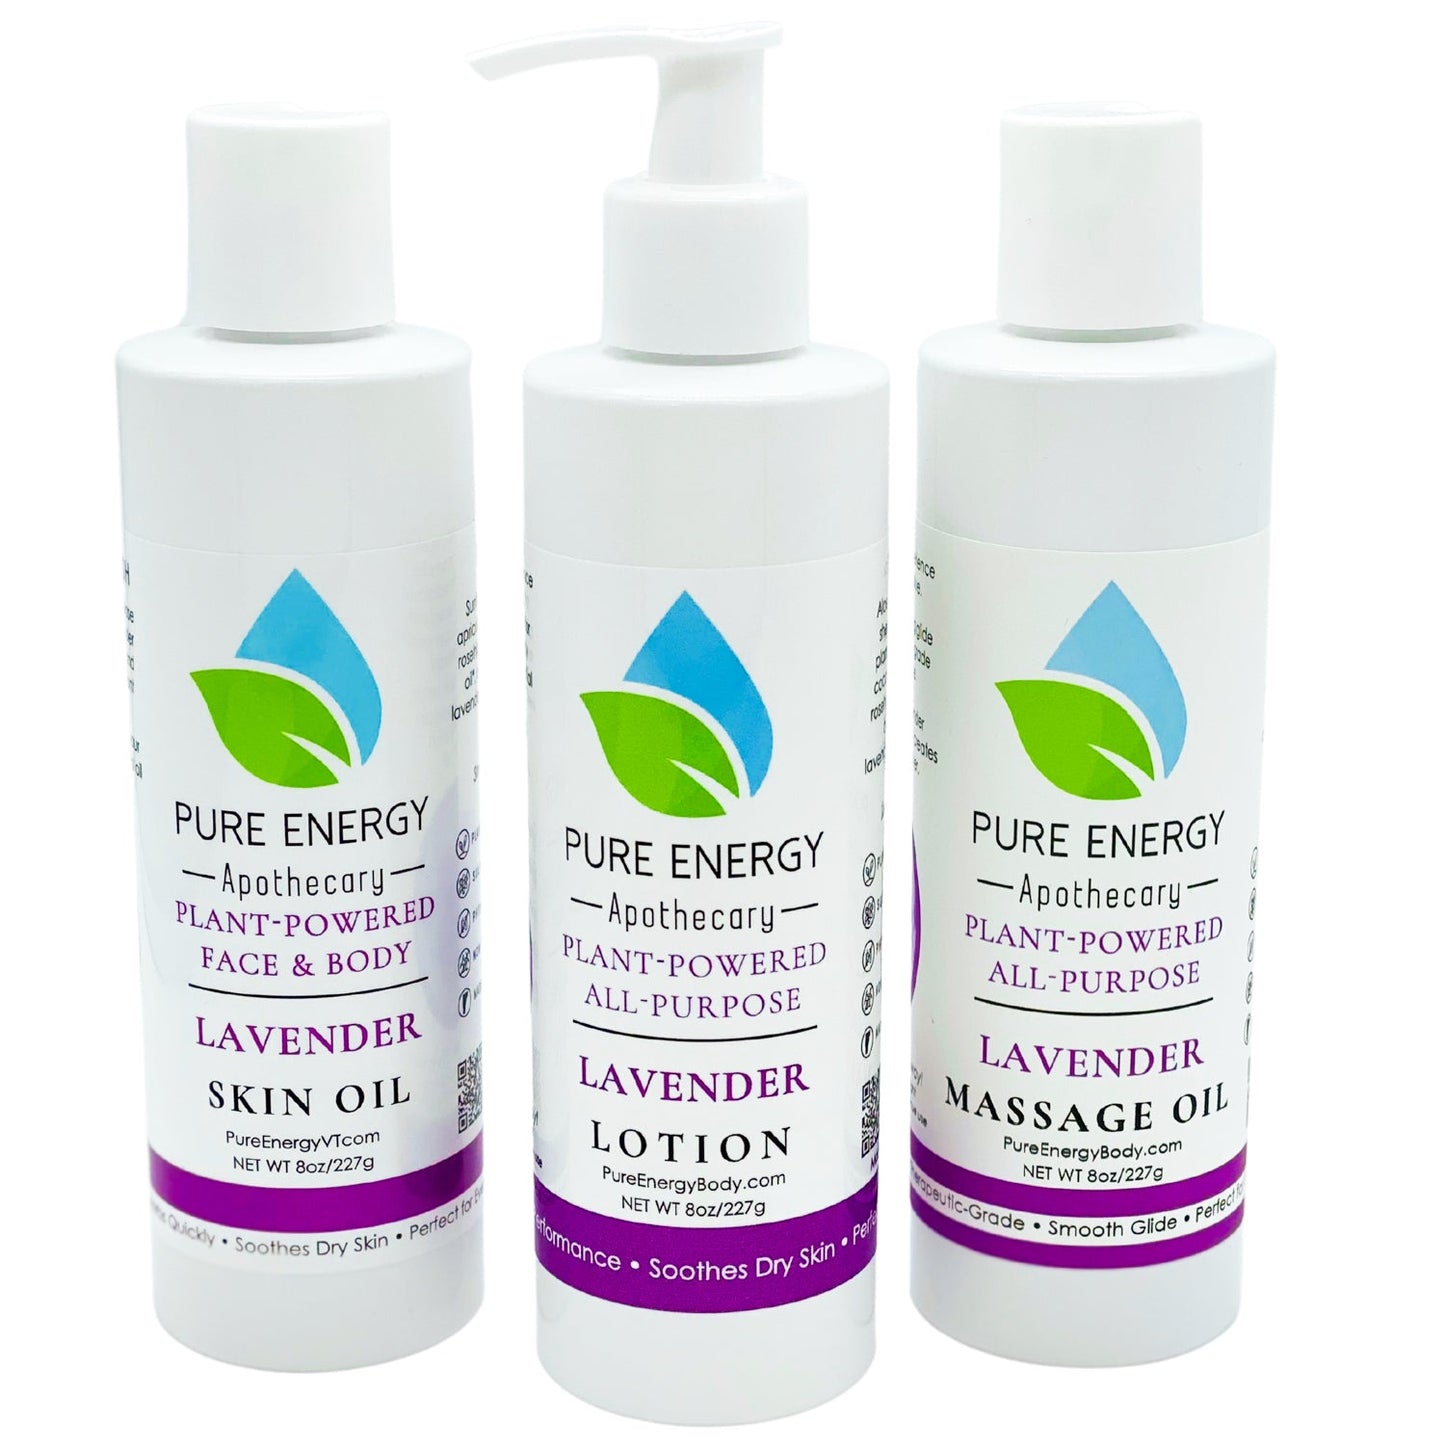 Moisture Madness Bundle (Lavender) by Pure Energy Apothecary